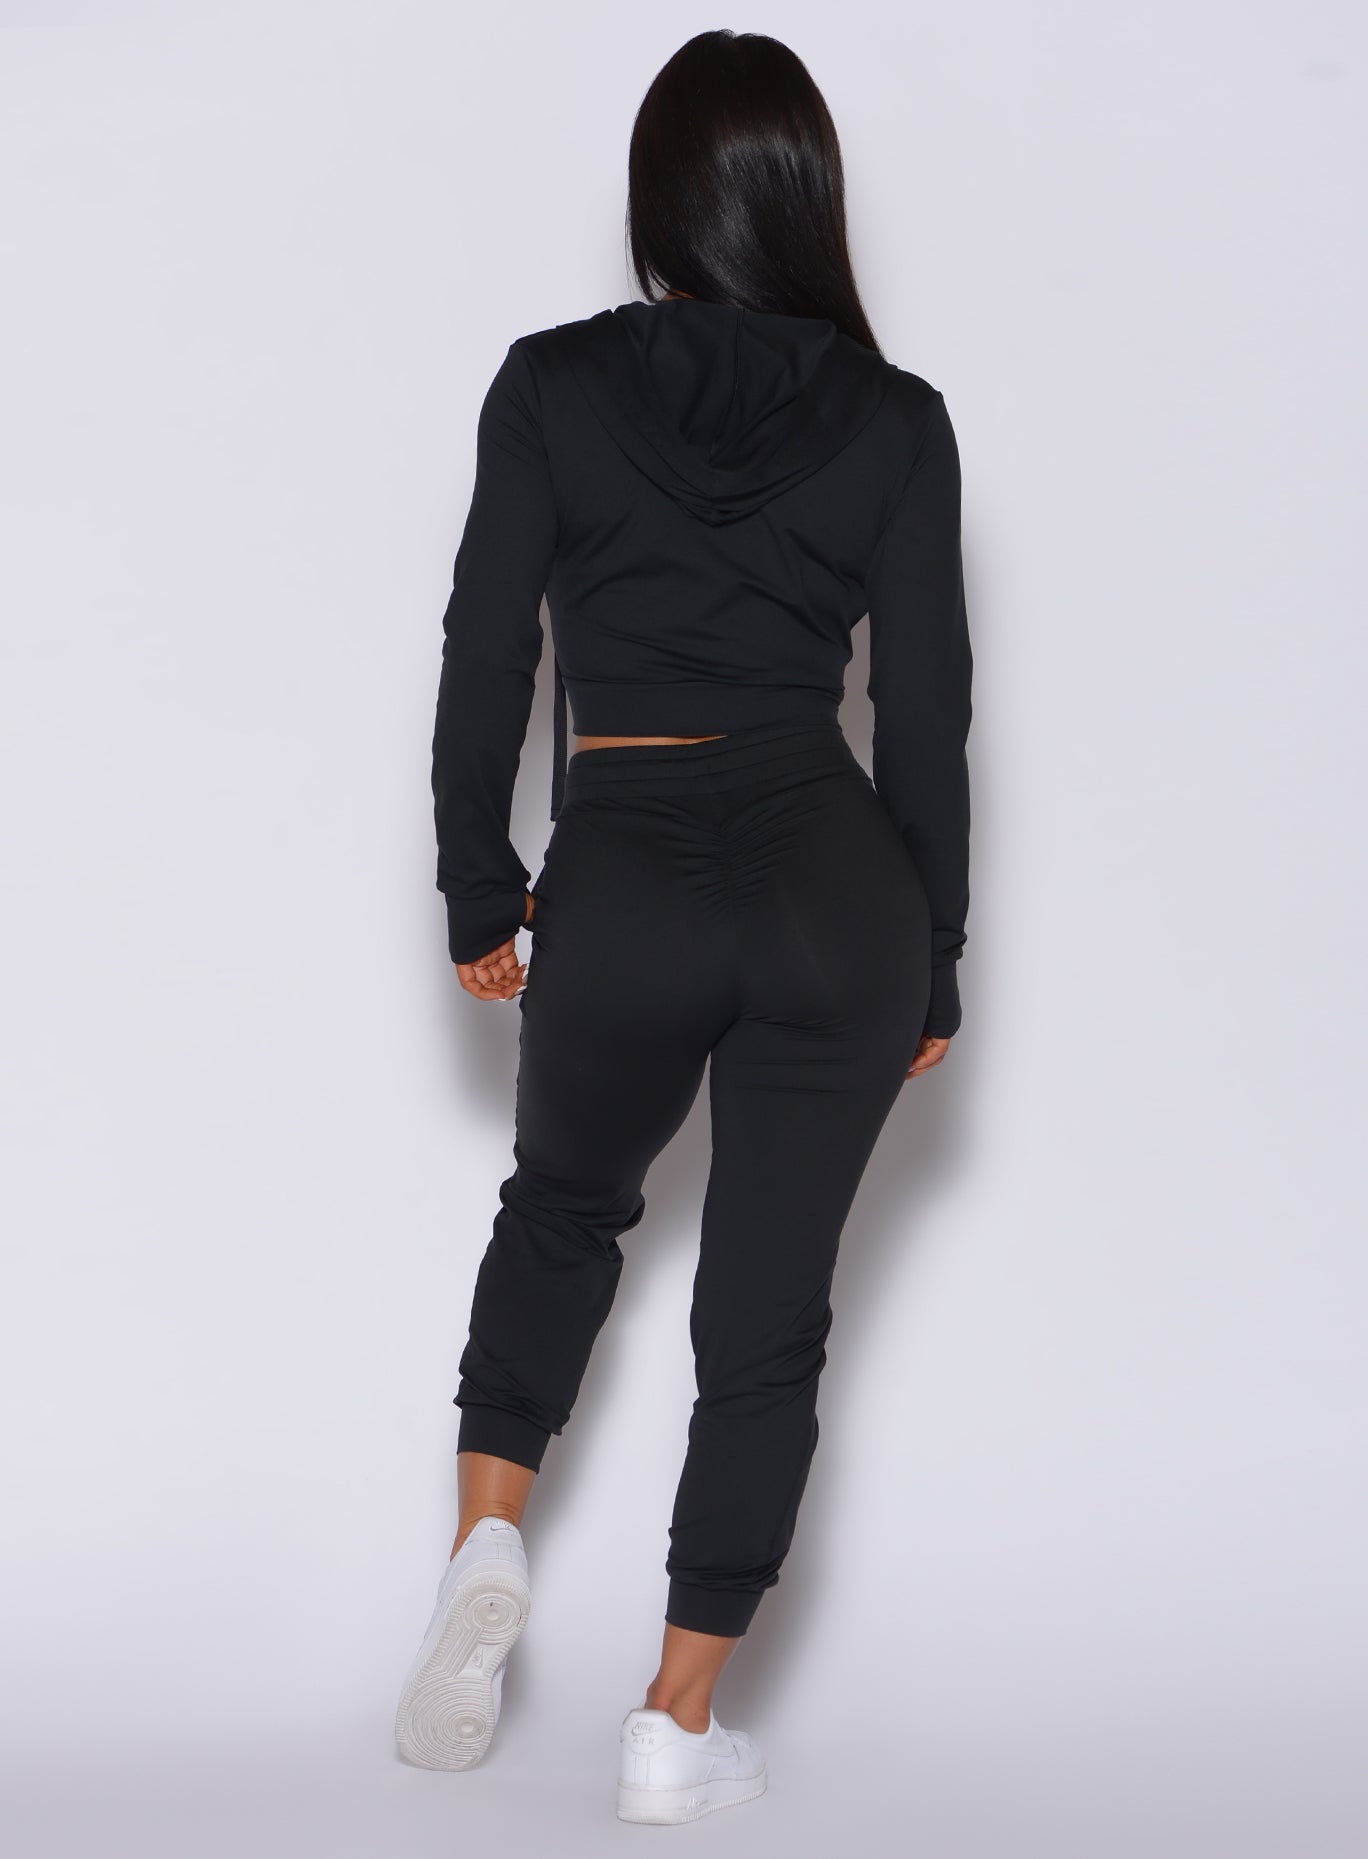 back view of model wearing the cozy black joggers with pockets and scrunch butt